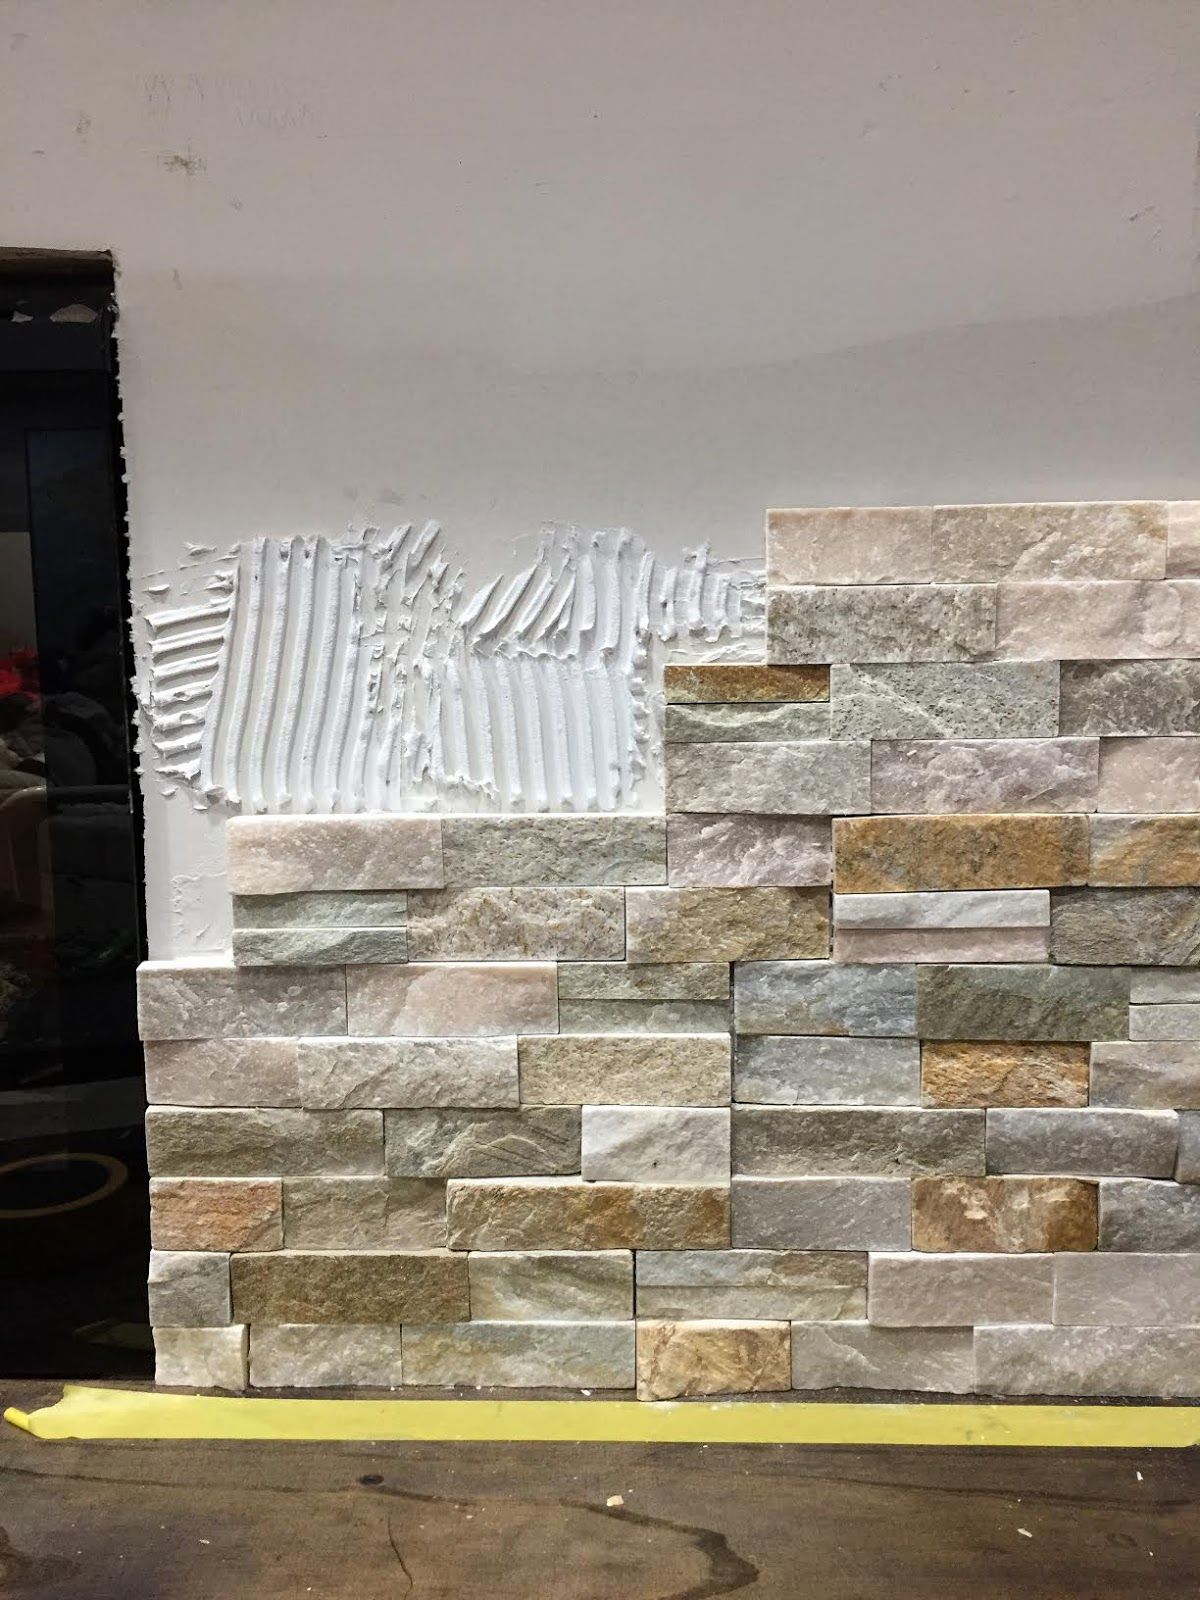 Fireplace Cover Up Fresh How to Install Stacked Stone Tile On A Fireplace Wall